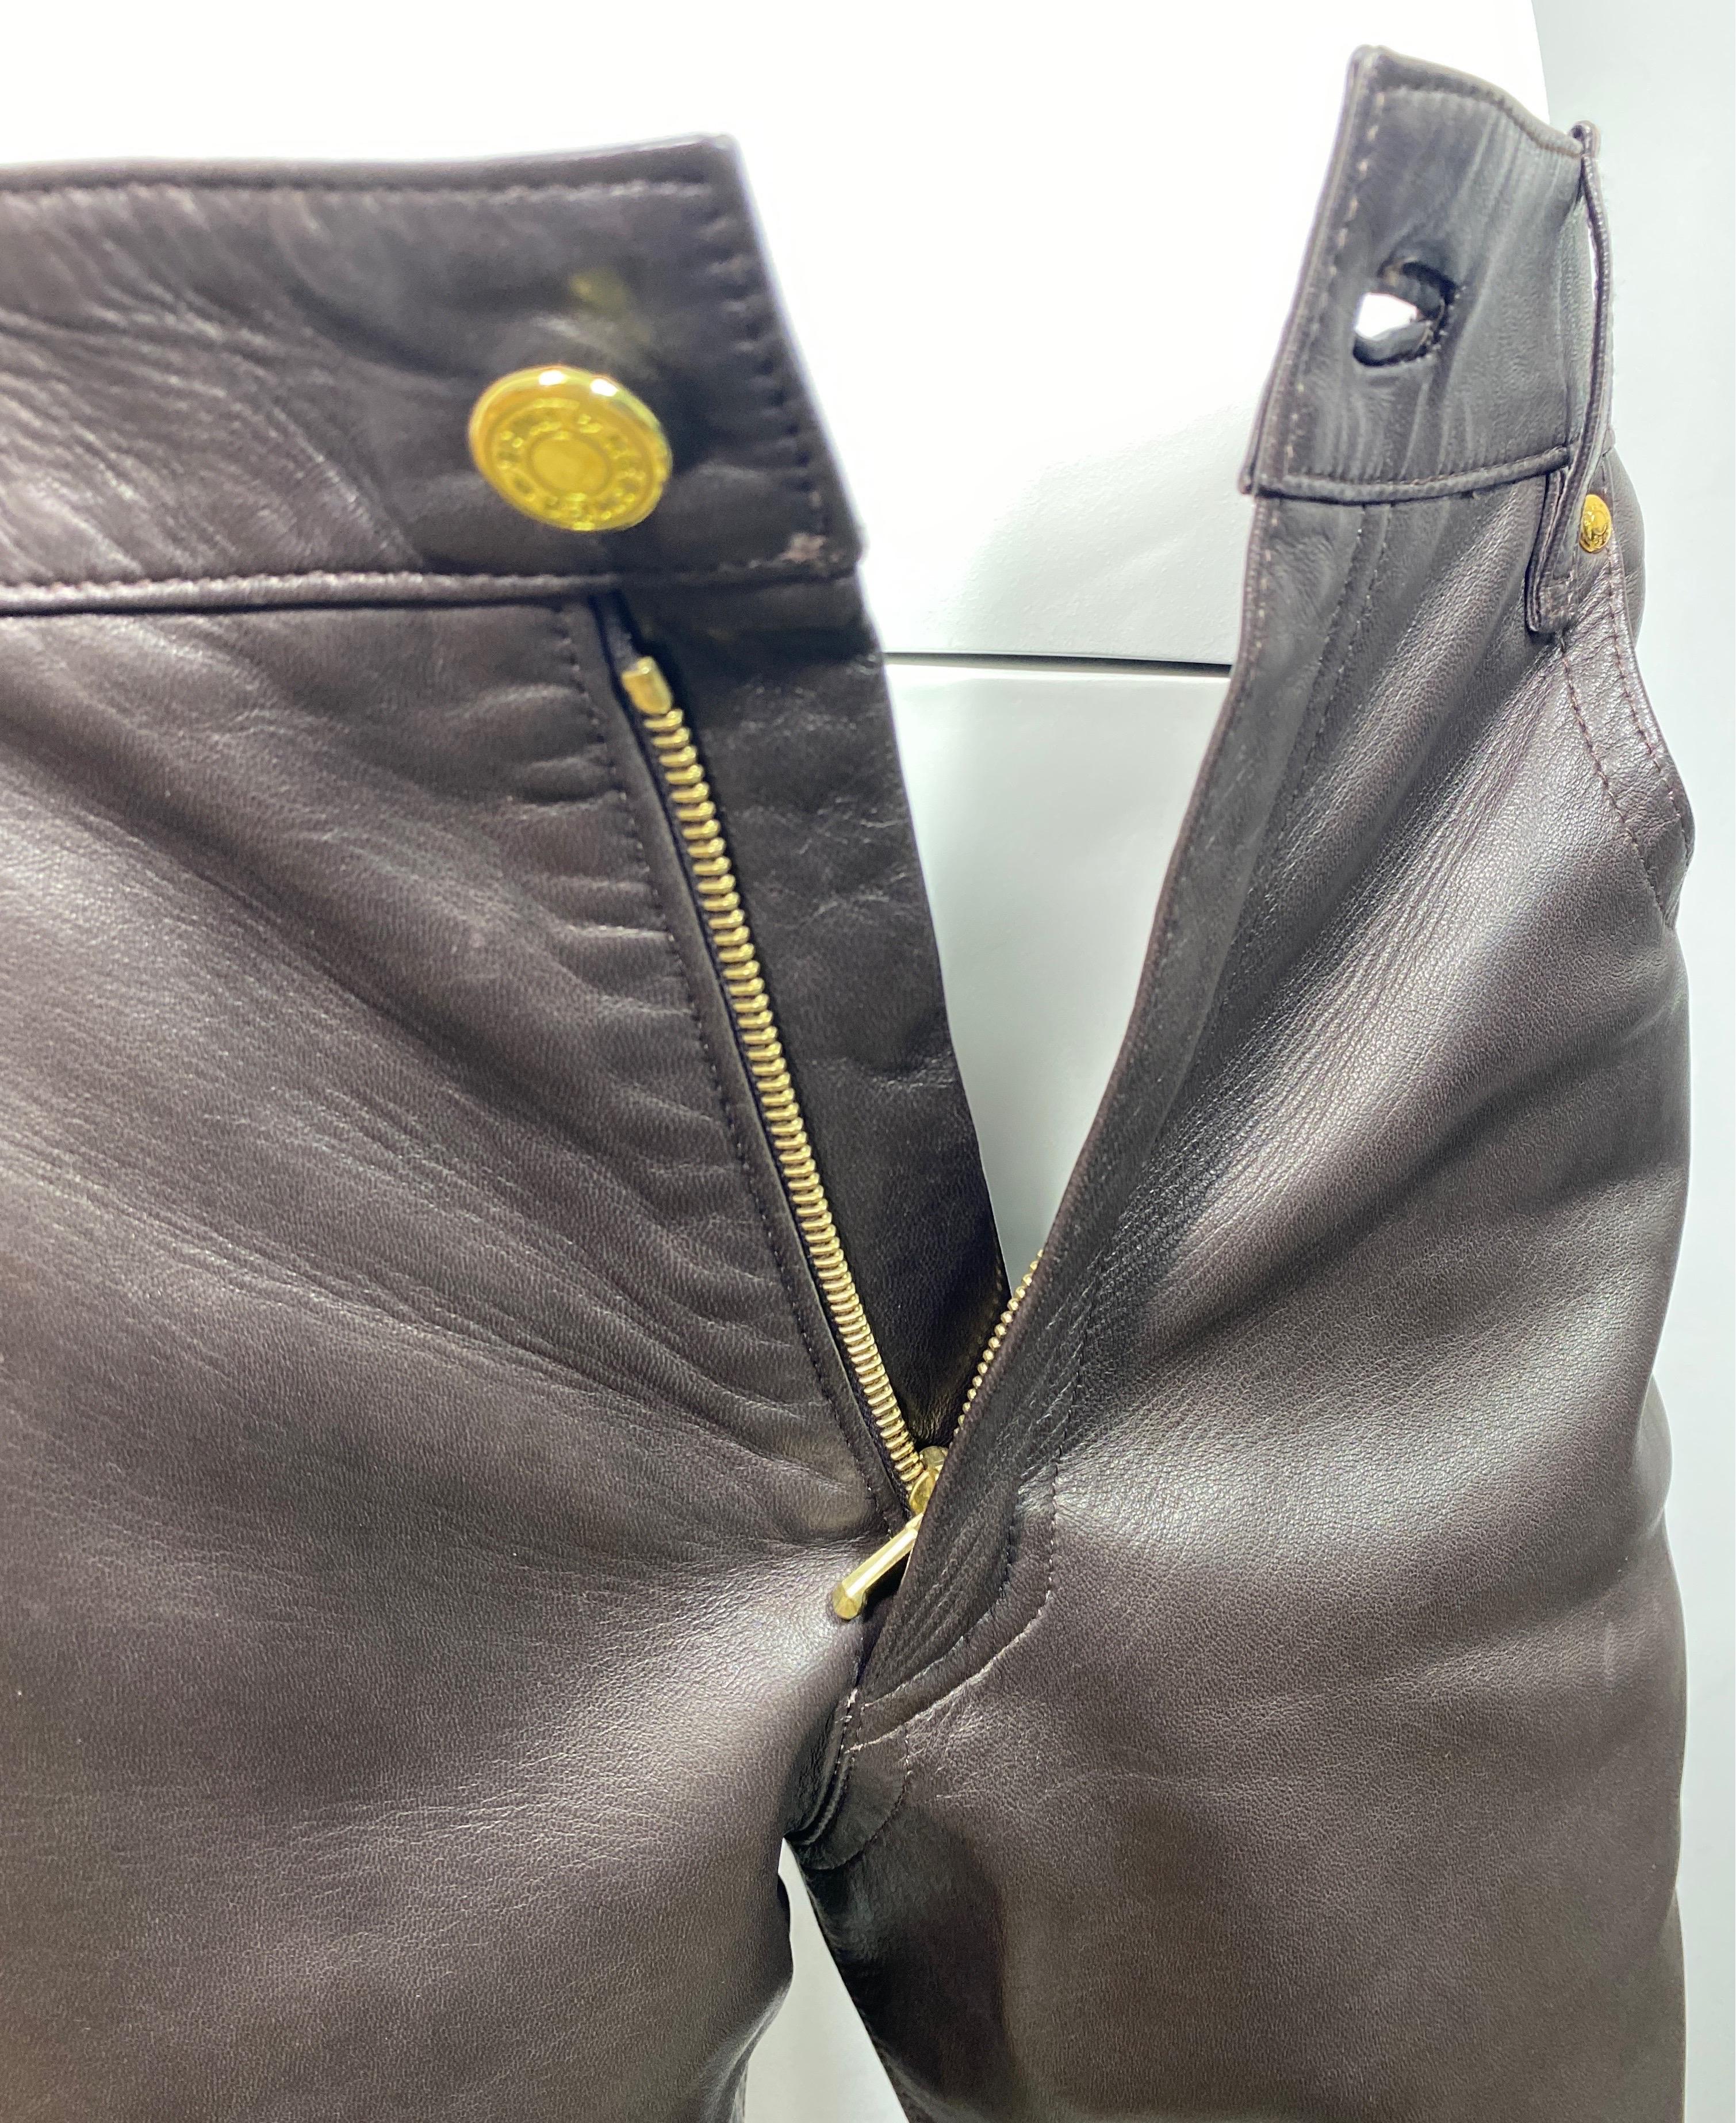 Hermes 1990’s Vintage Chocolate Brown Jean Style Leather Pants - Size 42 For Sale 12